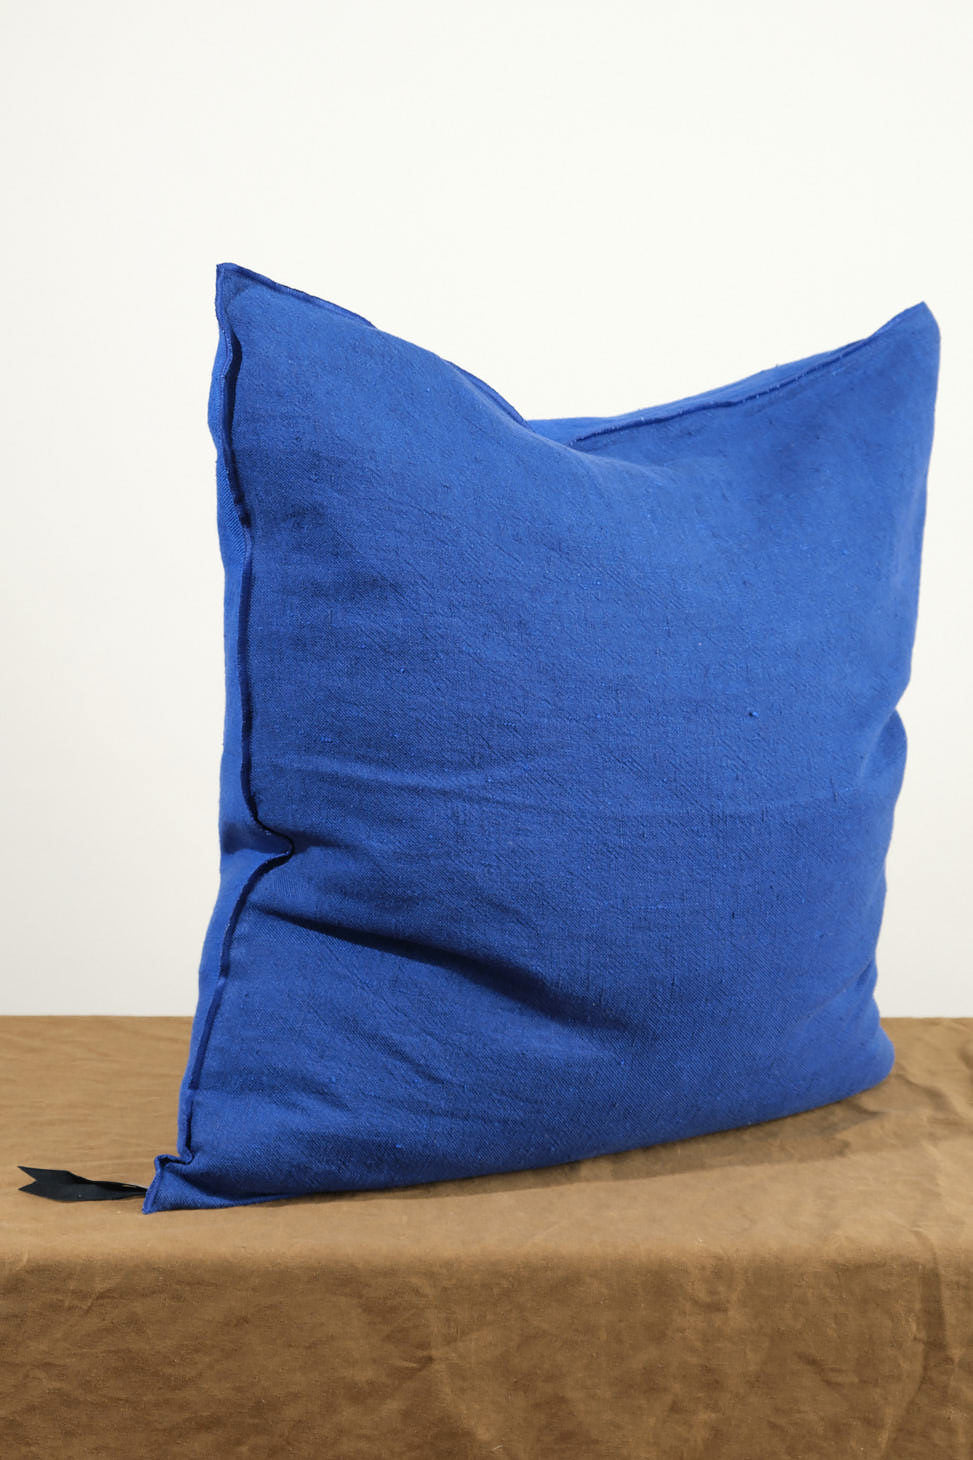 Angle view of 26" X 26" Crumpled Washed Linen Vice Versa Cushion in Cobalt